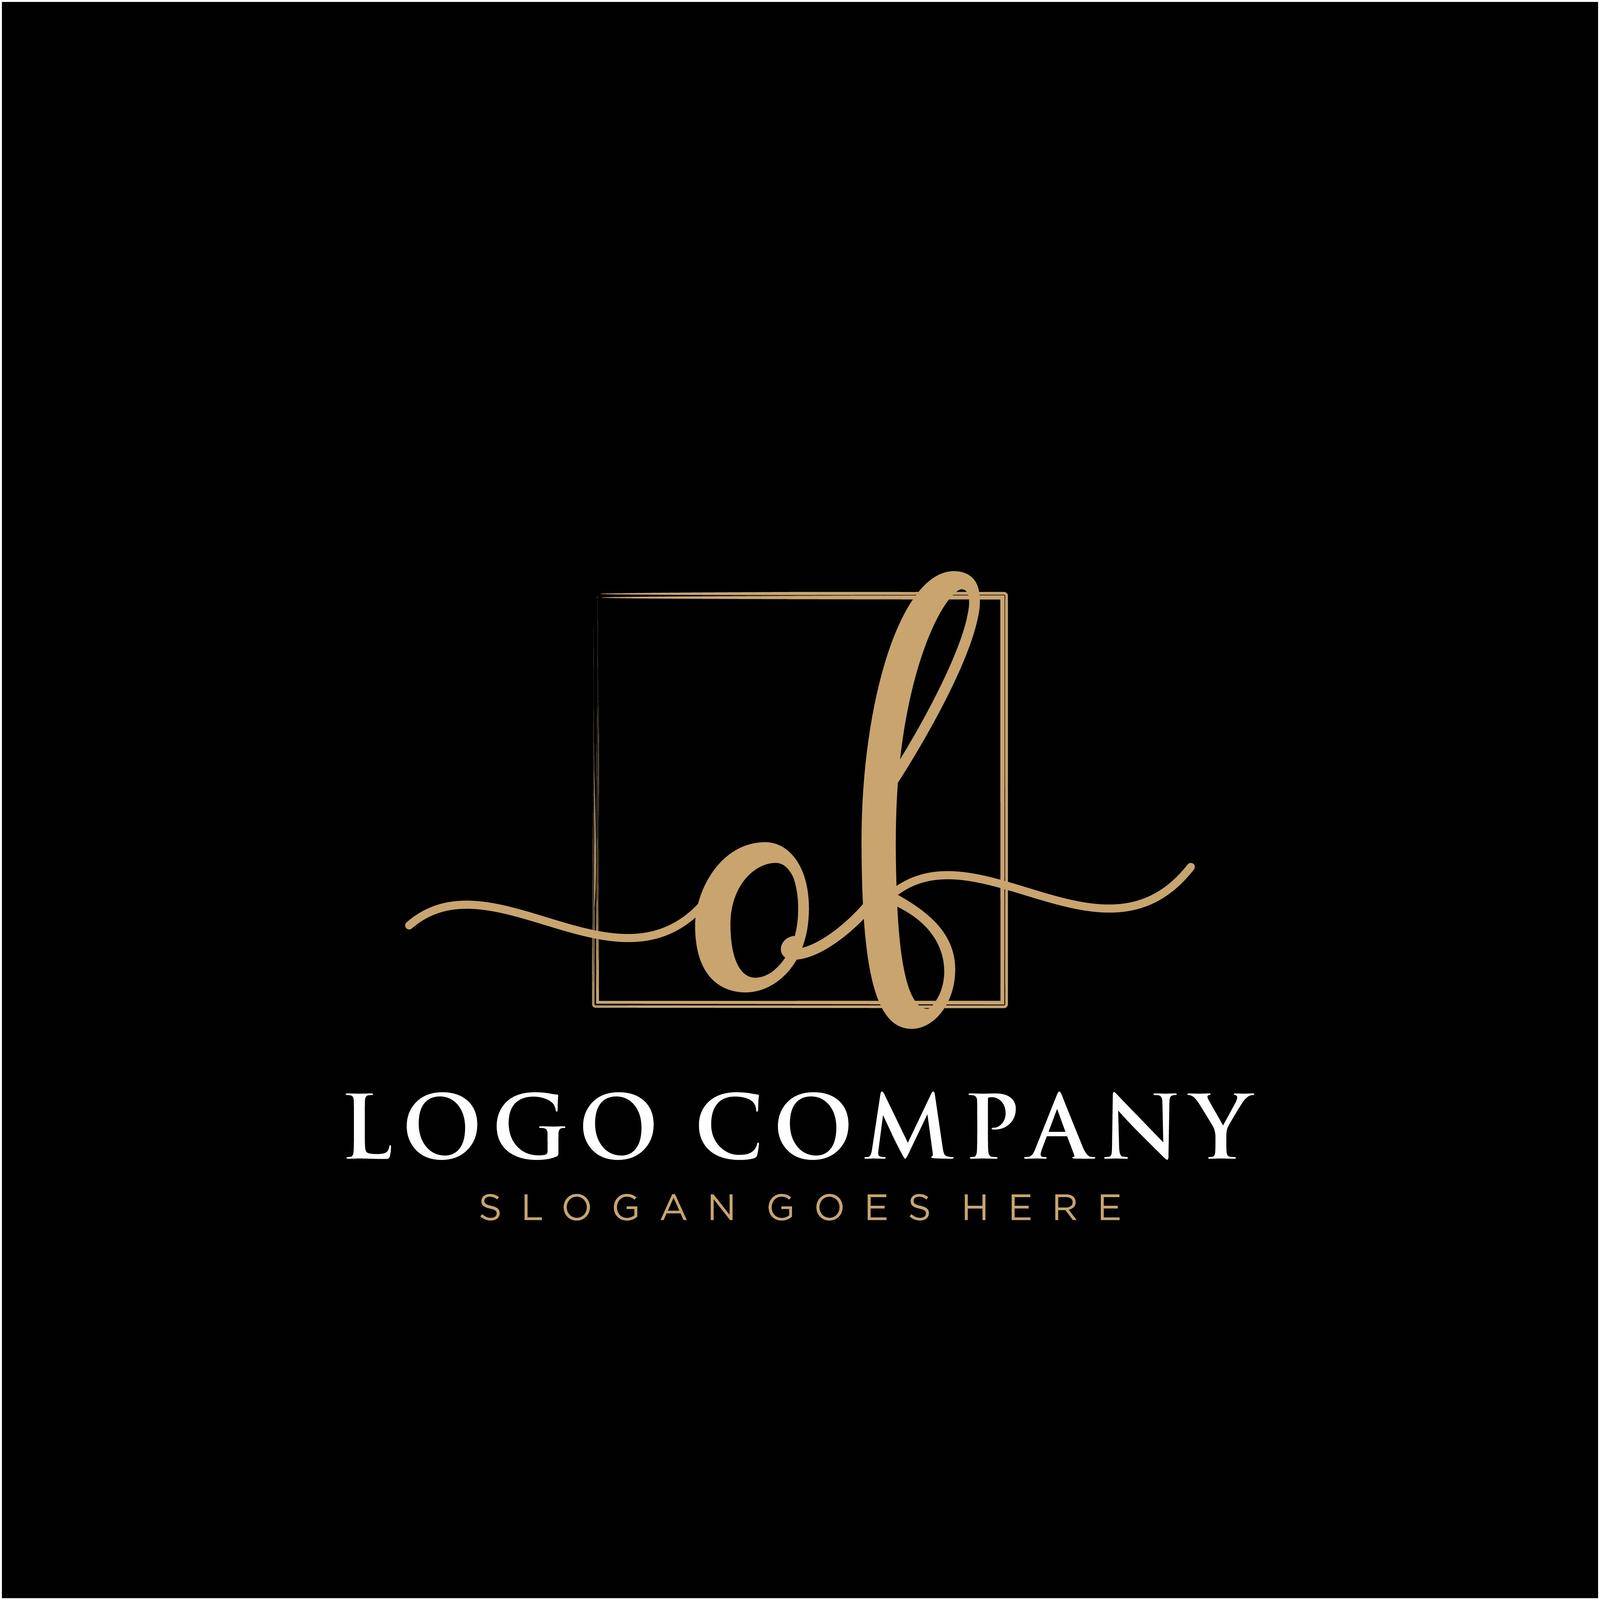 OF Initial handwriting logo with rectangle template vector by liaanniesatul